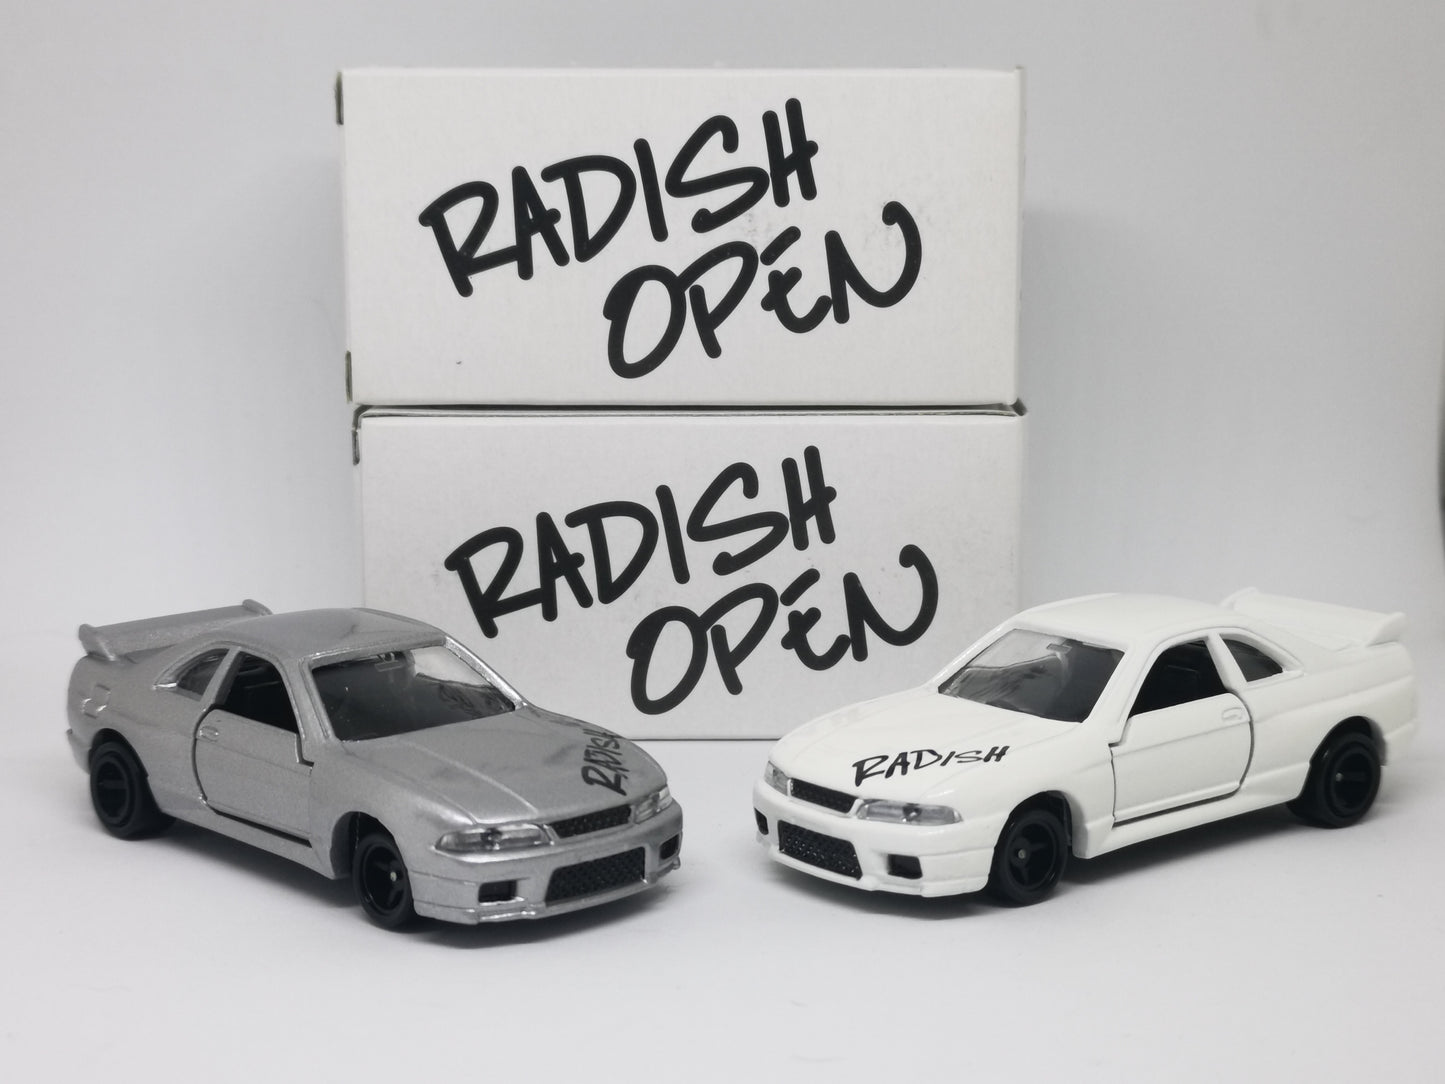 Tomica Radish Open Exclusive Nissan Skyline GT-R R33 set of two Made in Japan